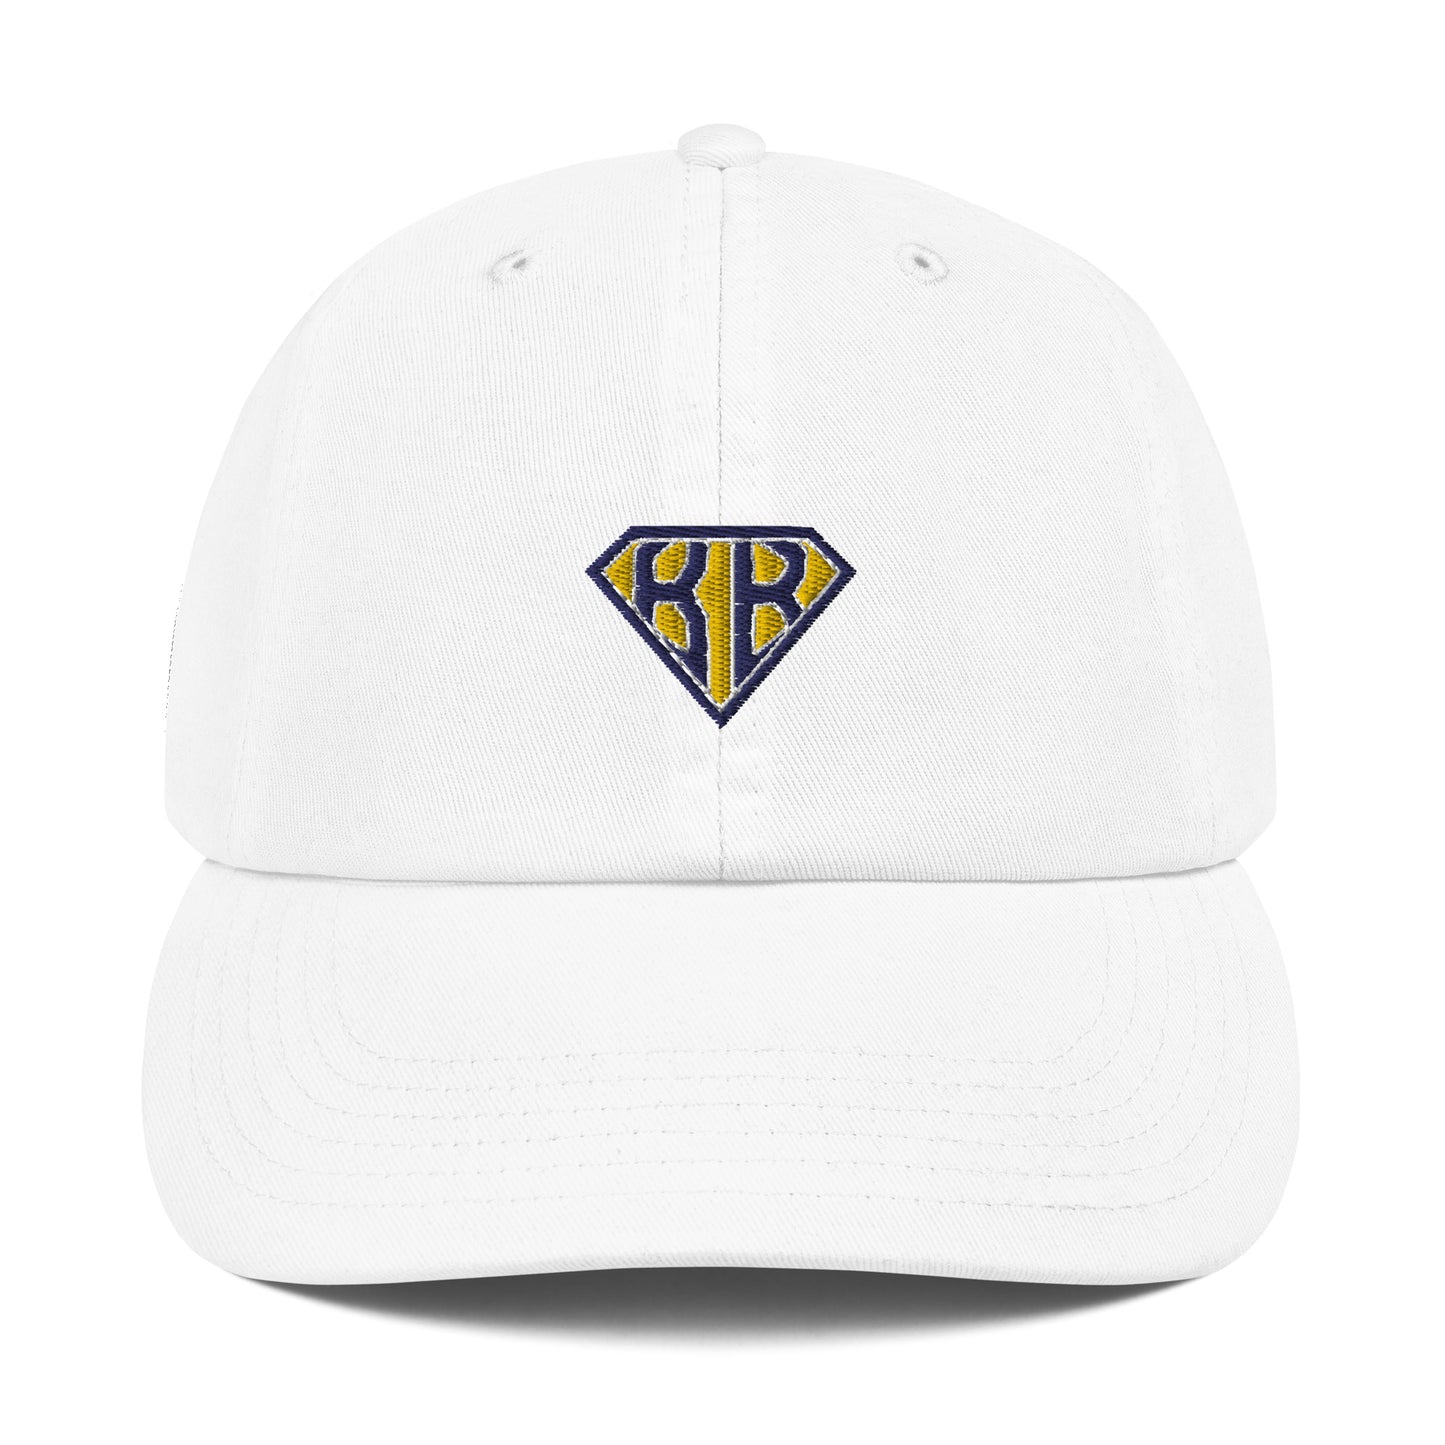 BB Embroidered Champion Dad Cap